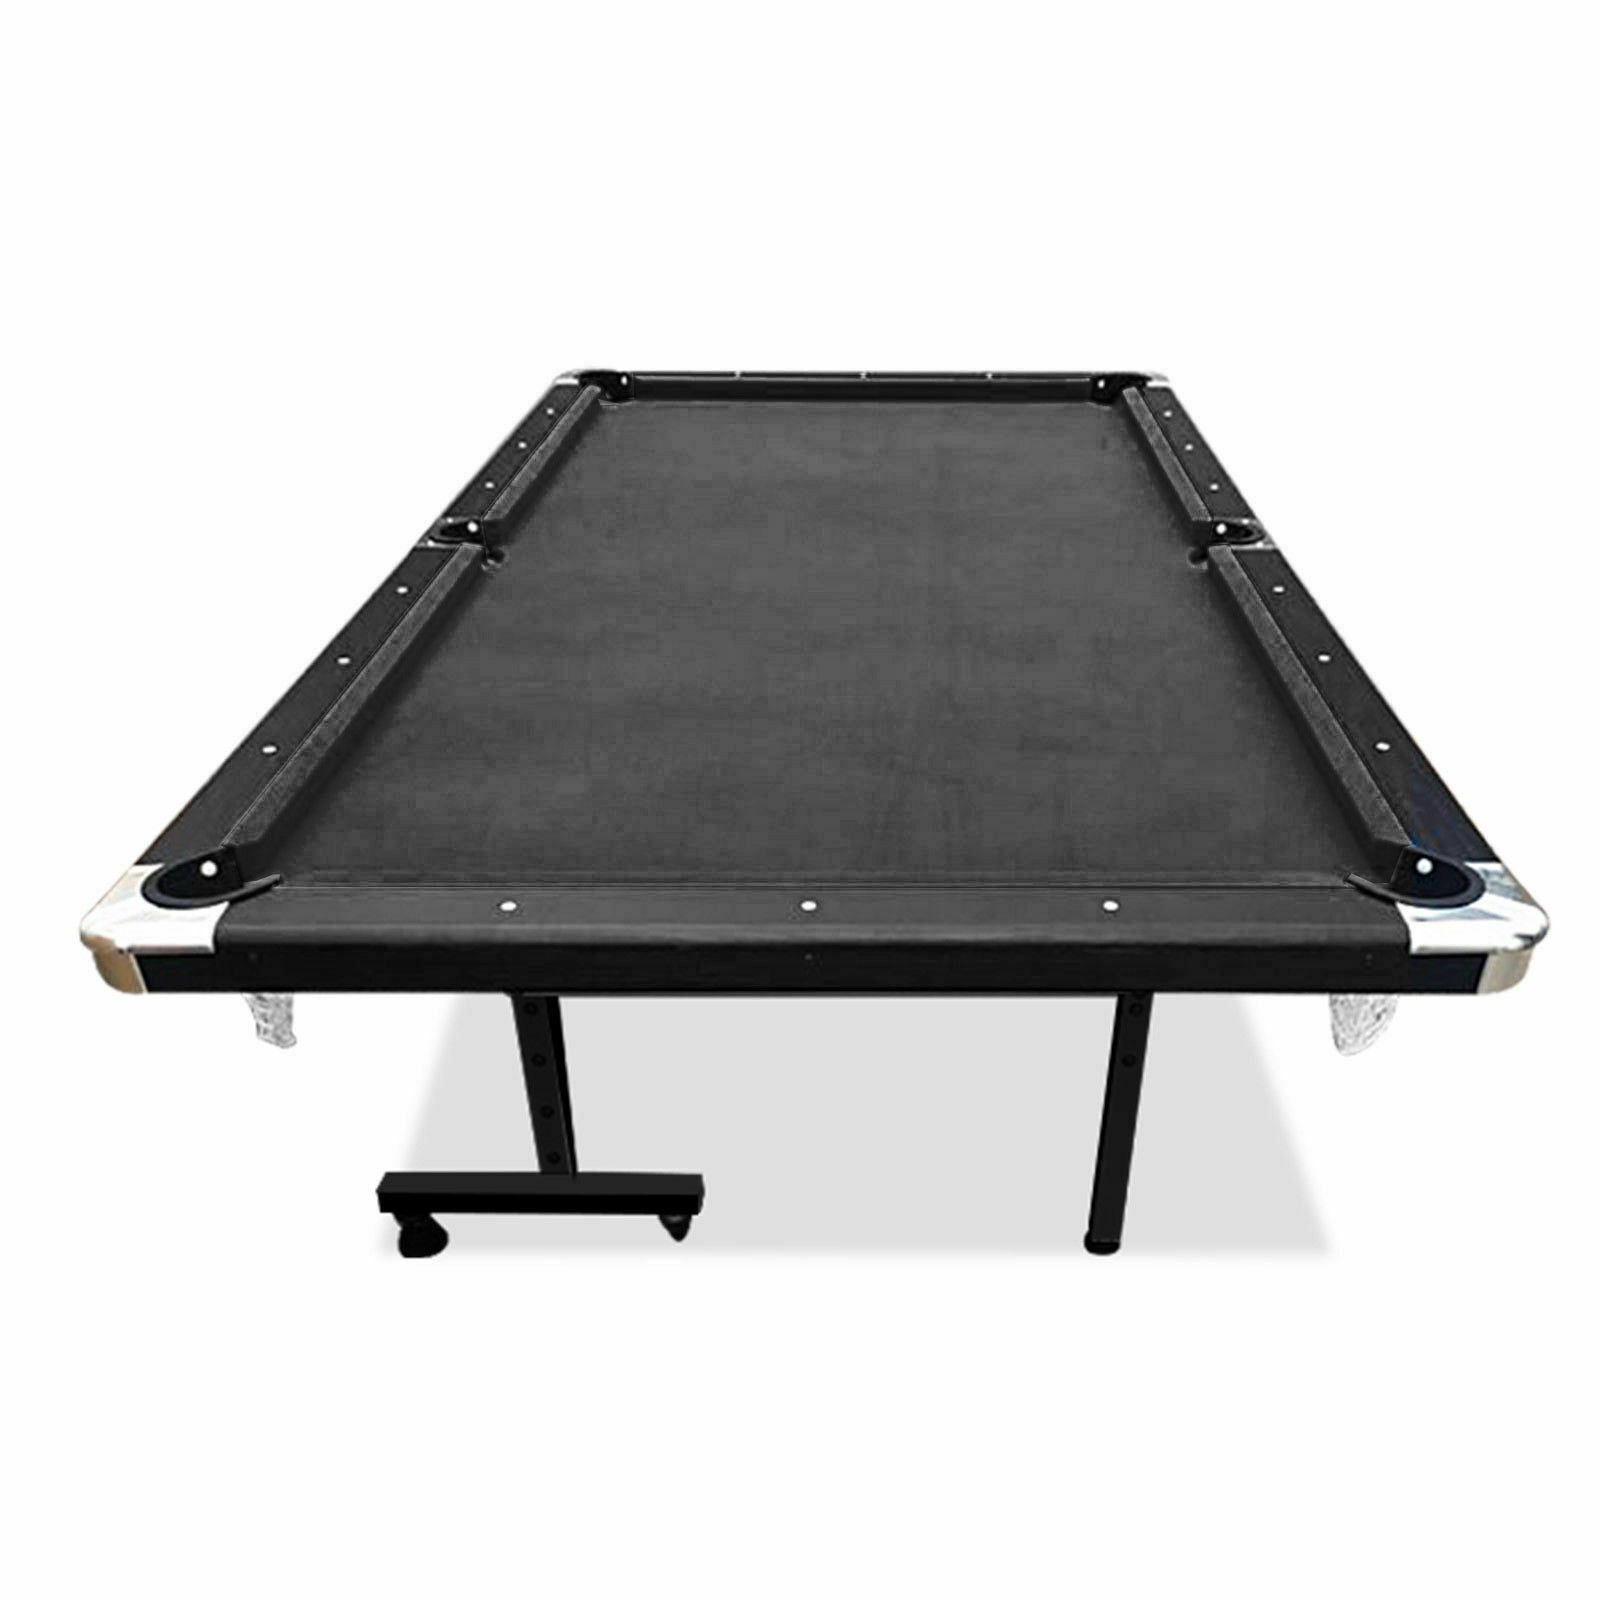 8FT Foldable Pool Table Blue/Red/Green Felt Billiard Table Free Accessory for Small Room - BLACK